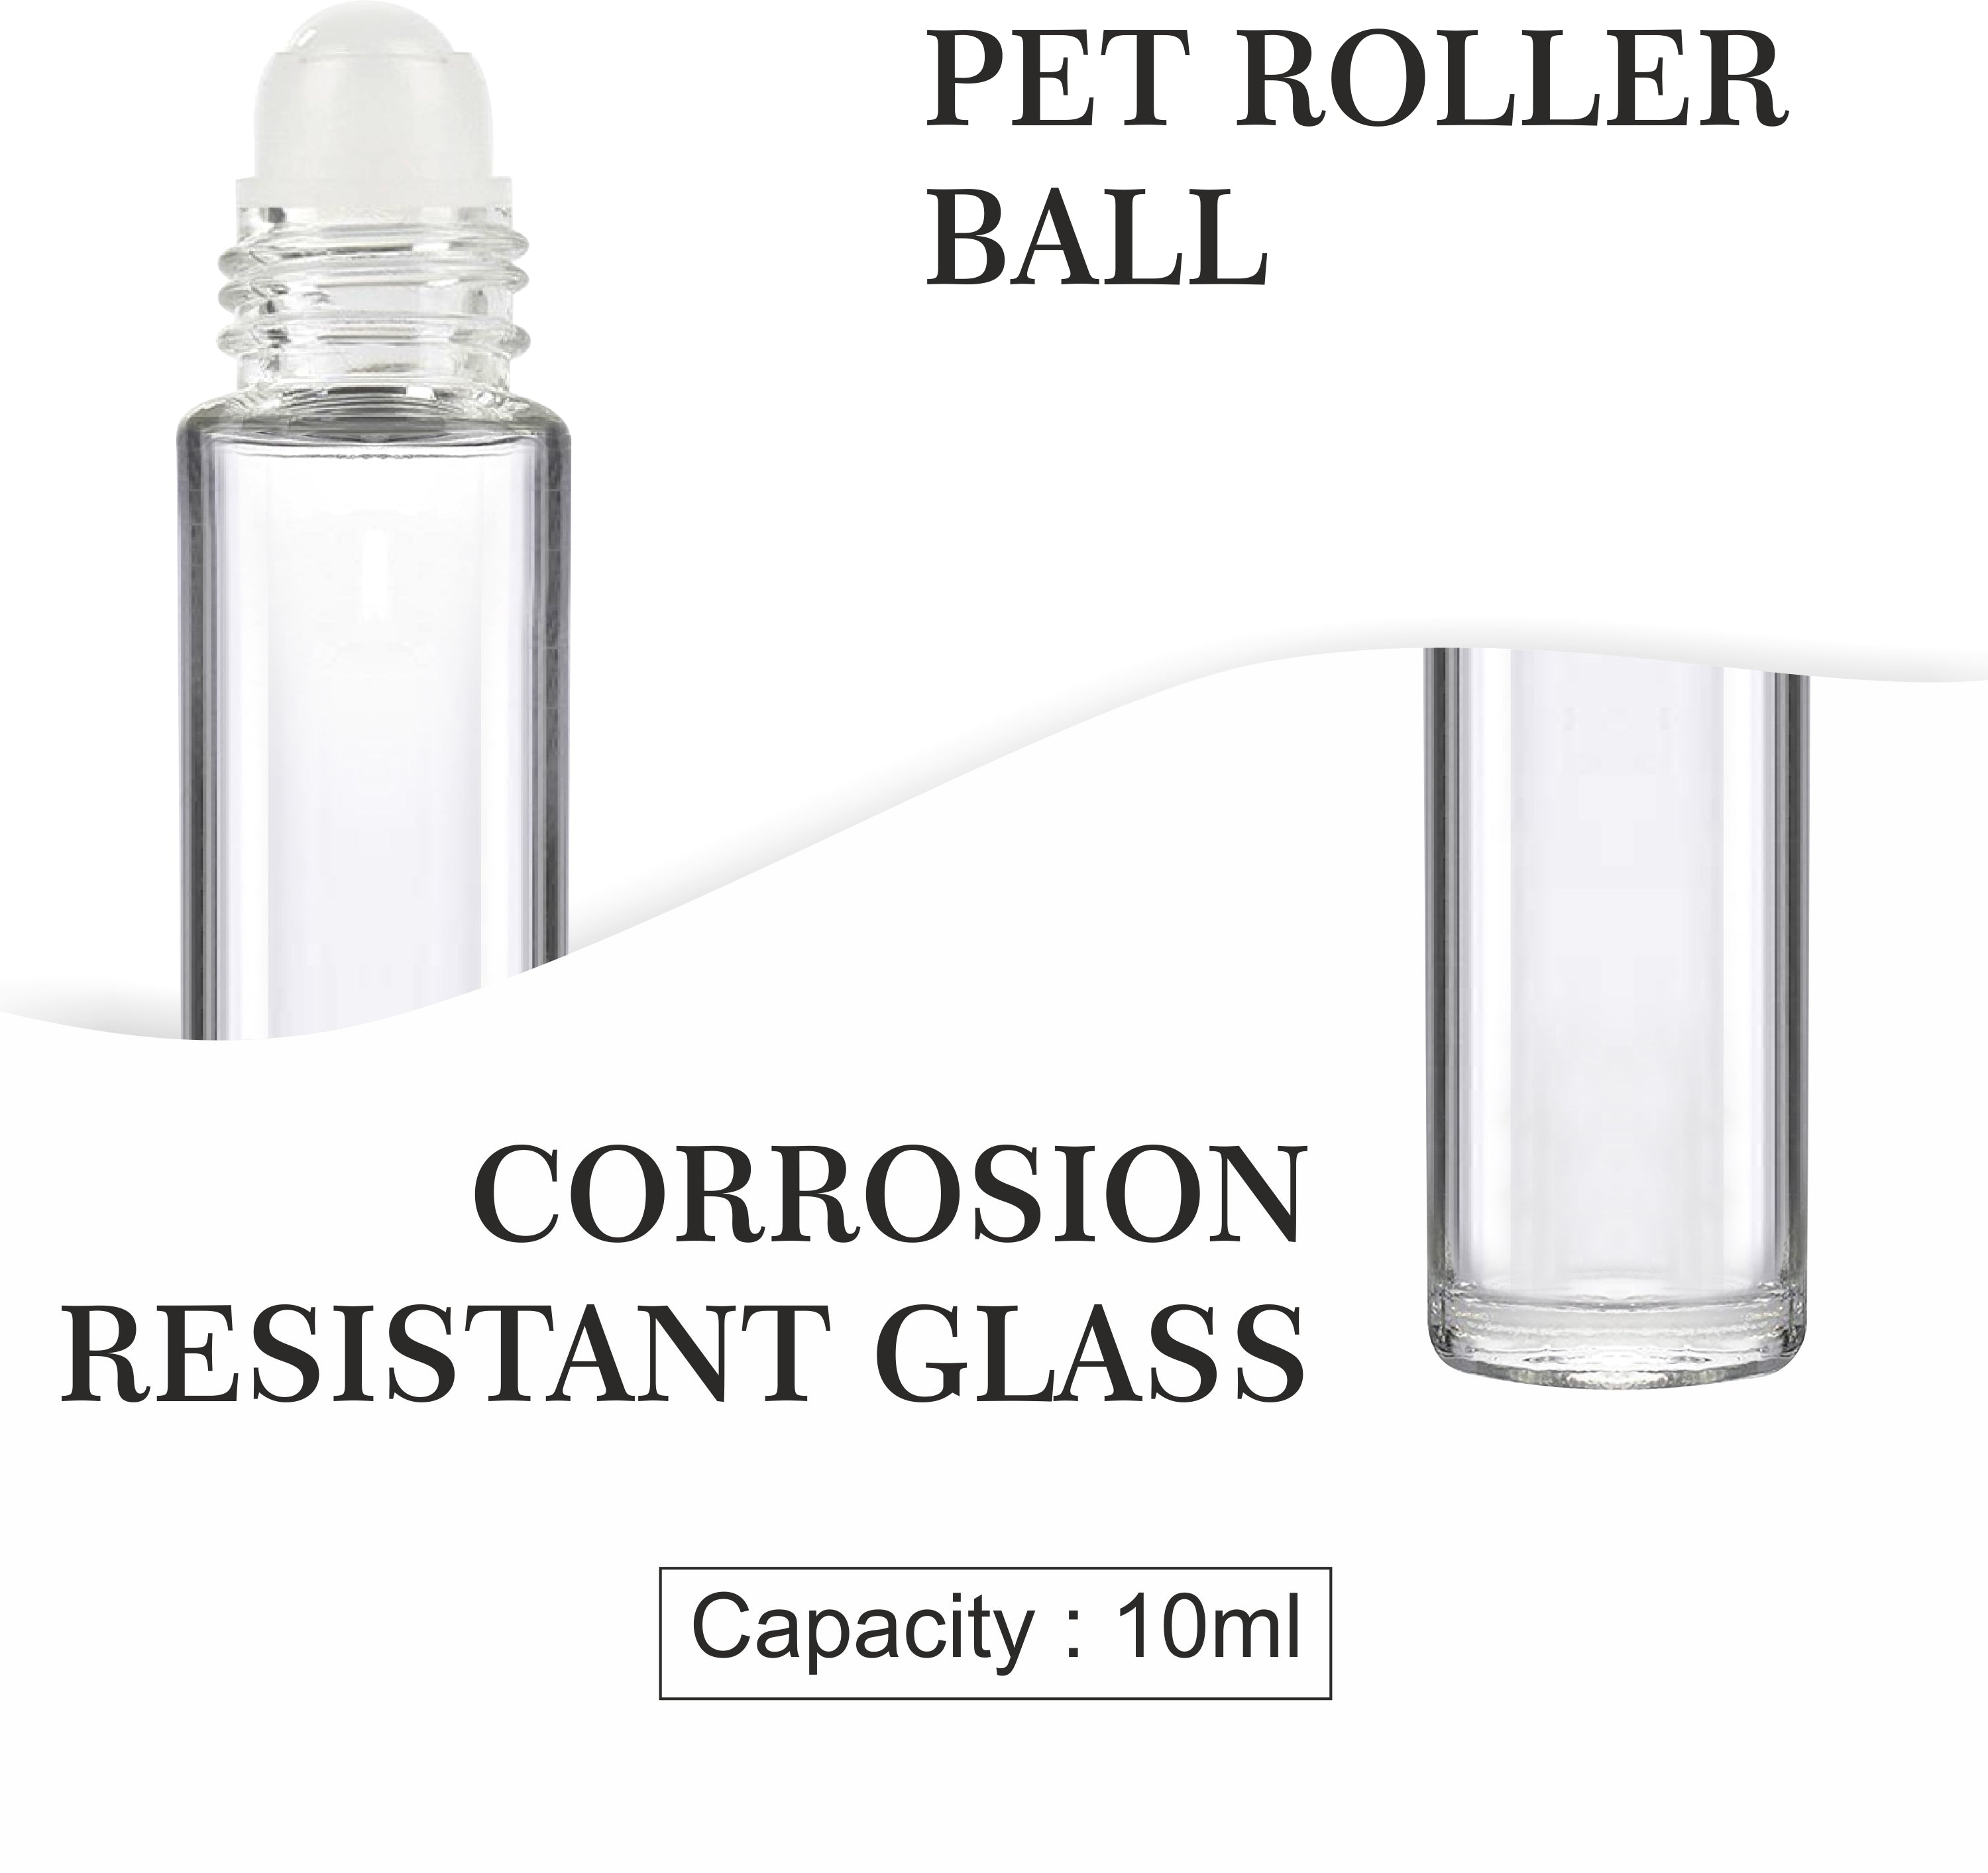 Essential Oil Roller Bottles, Empty Refillable Clear Glass Roll-on Bottles Perfume Roller Bottles with Roller Balls and Black Cap |ZMG41|